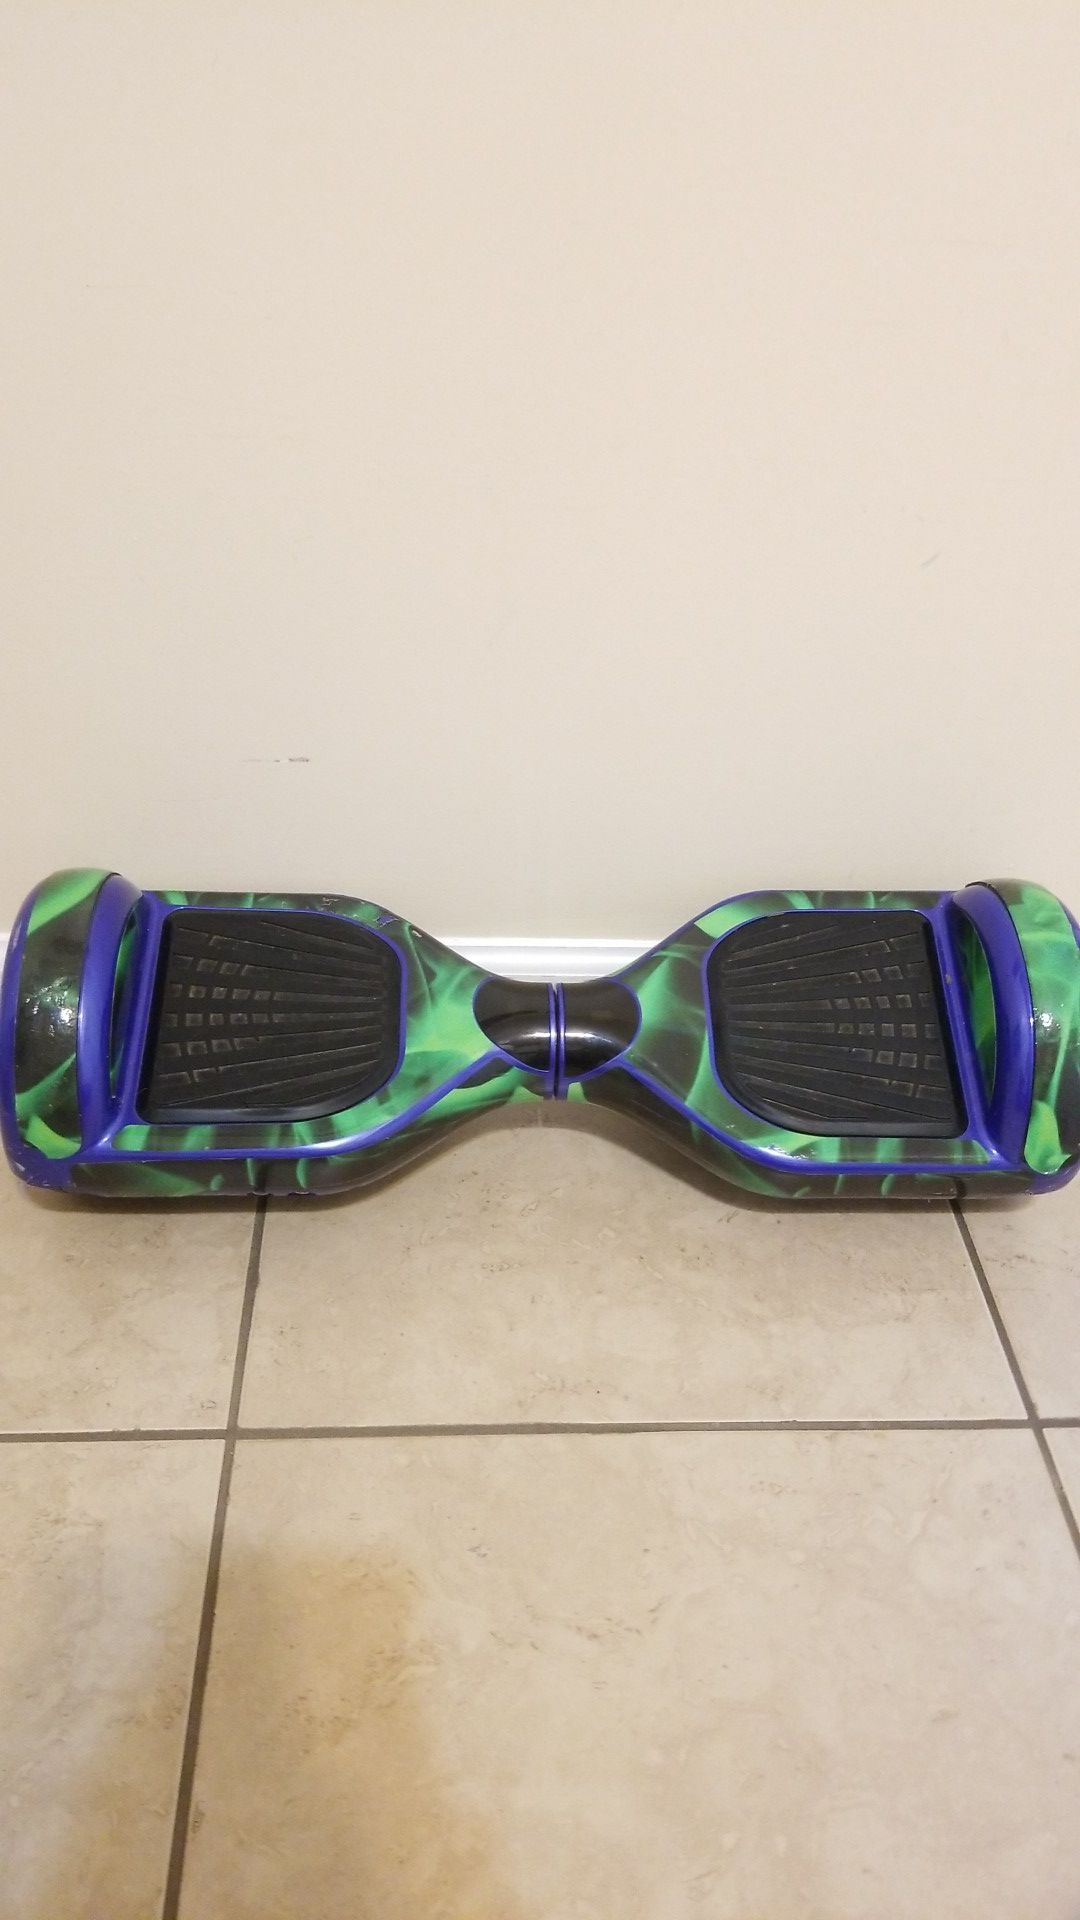 6 inch Wheel Bluetooth Hoverboard